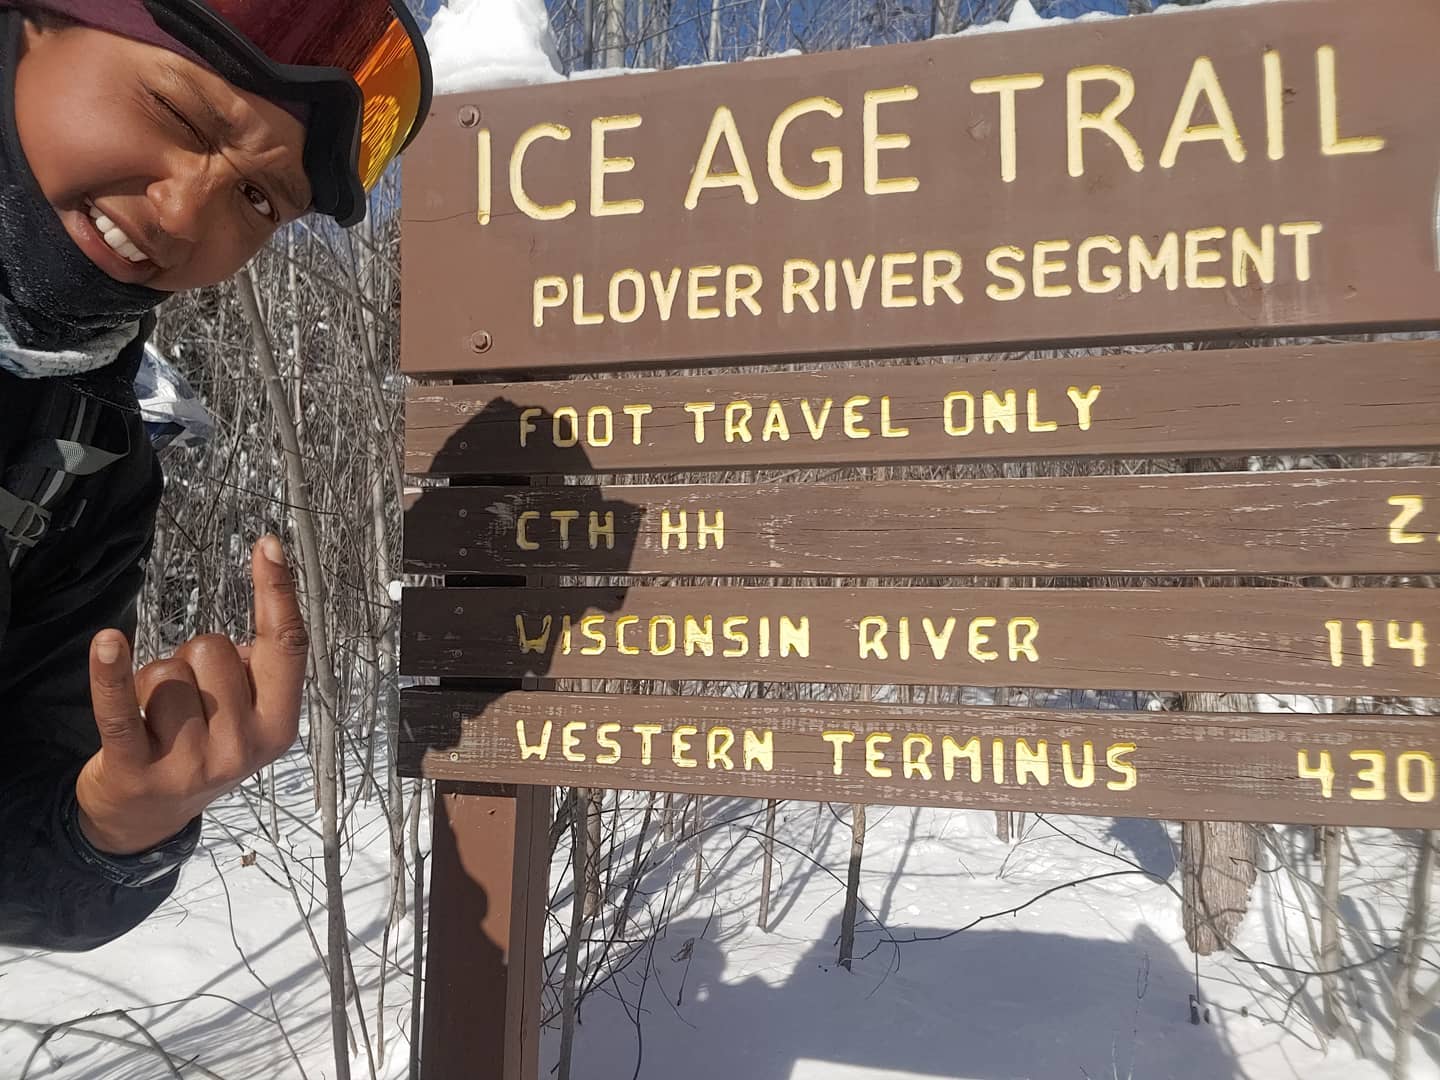 Emily Ford next to an Ice Age Trail sign